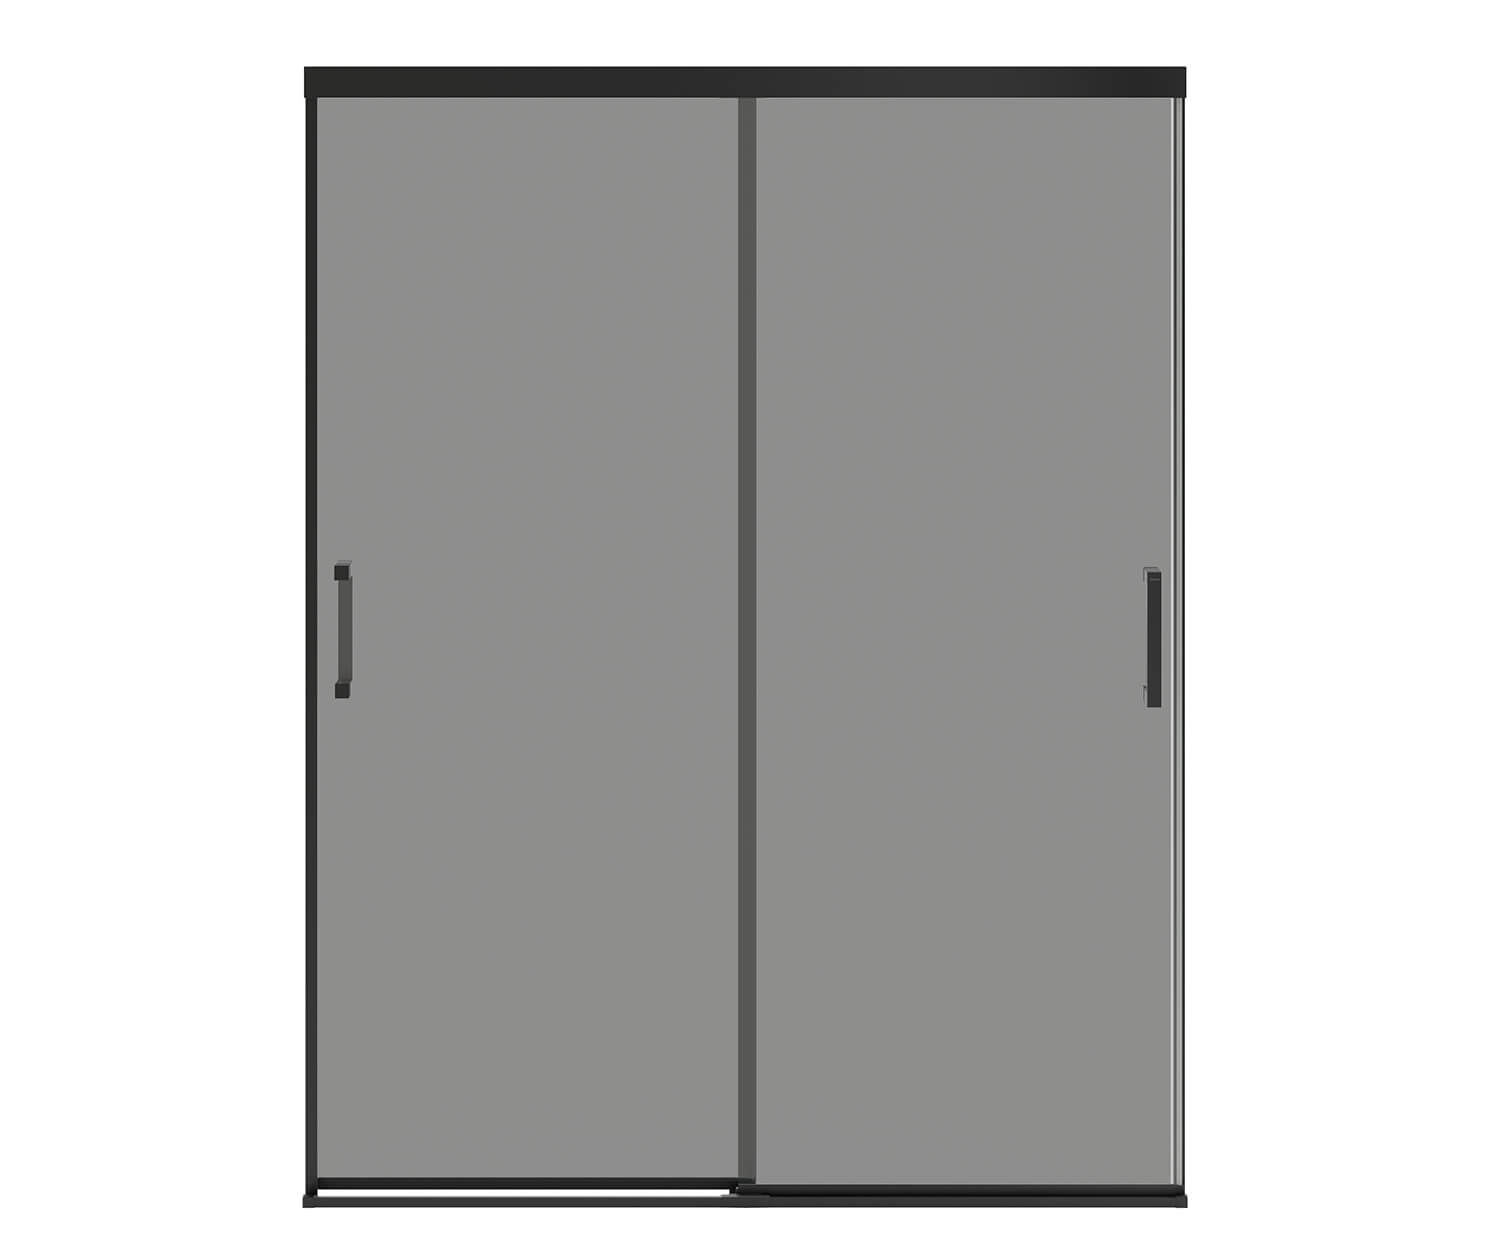 Incognito 76 Smoke 56-59 x 76 in. 8mm Bypass Shower Door for 